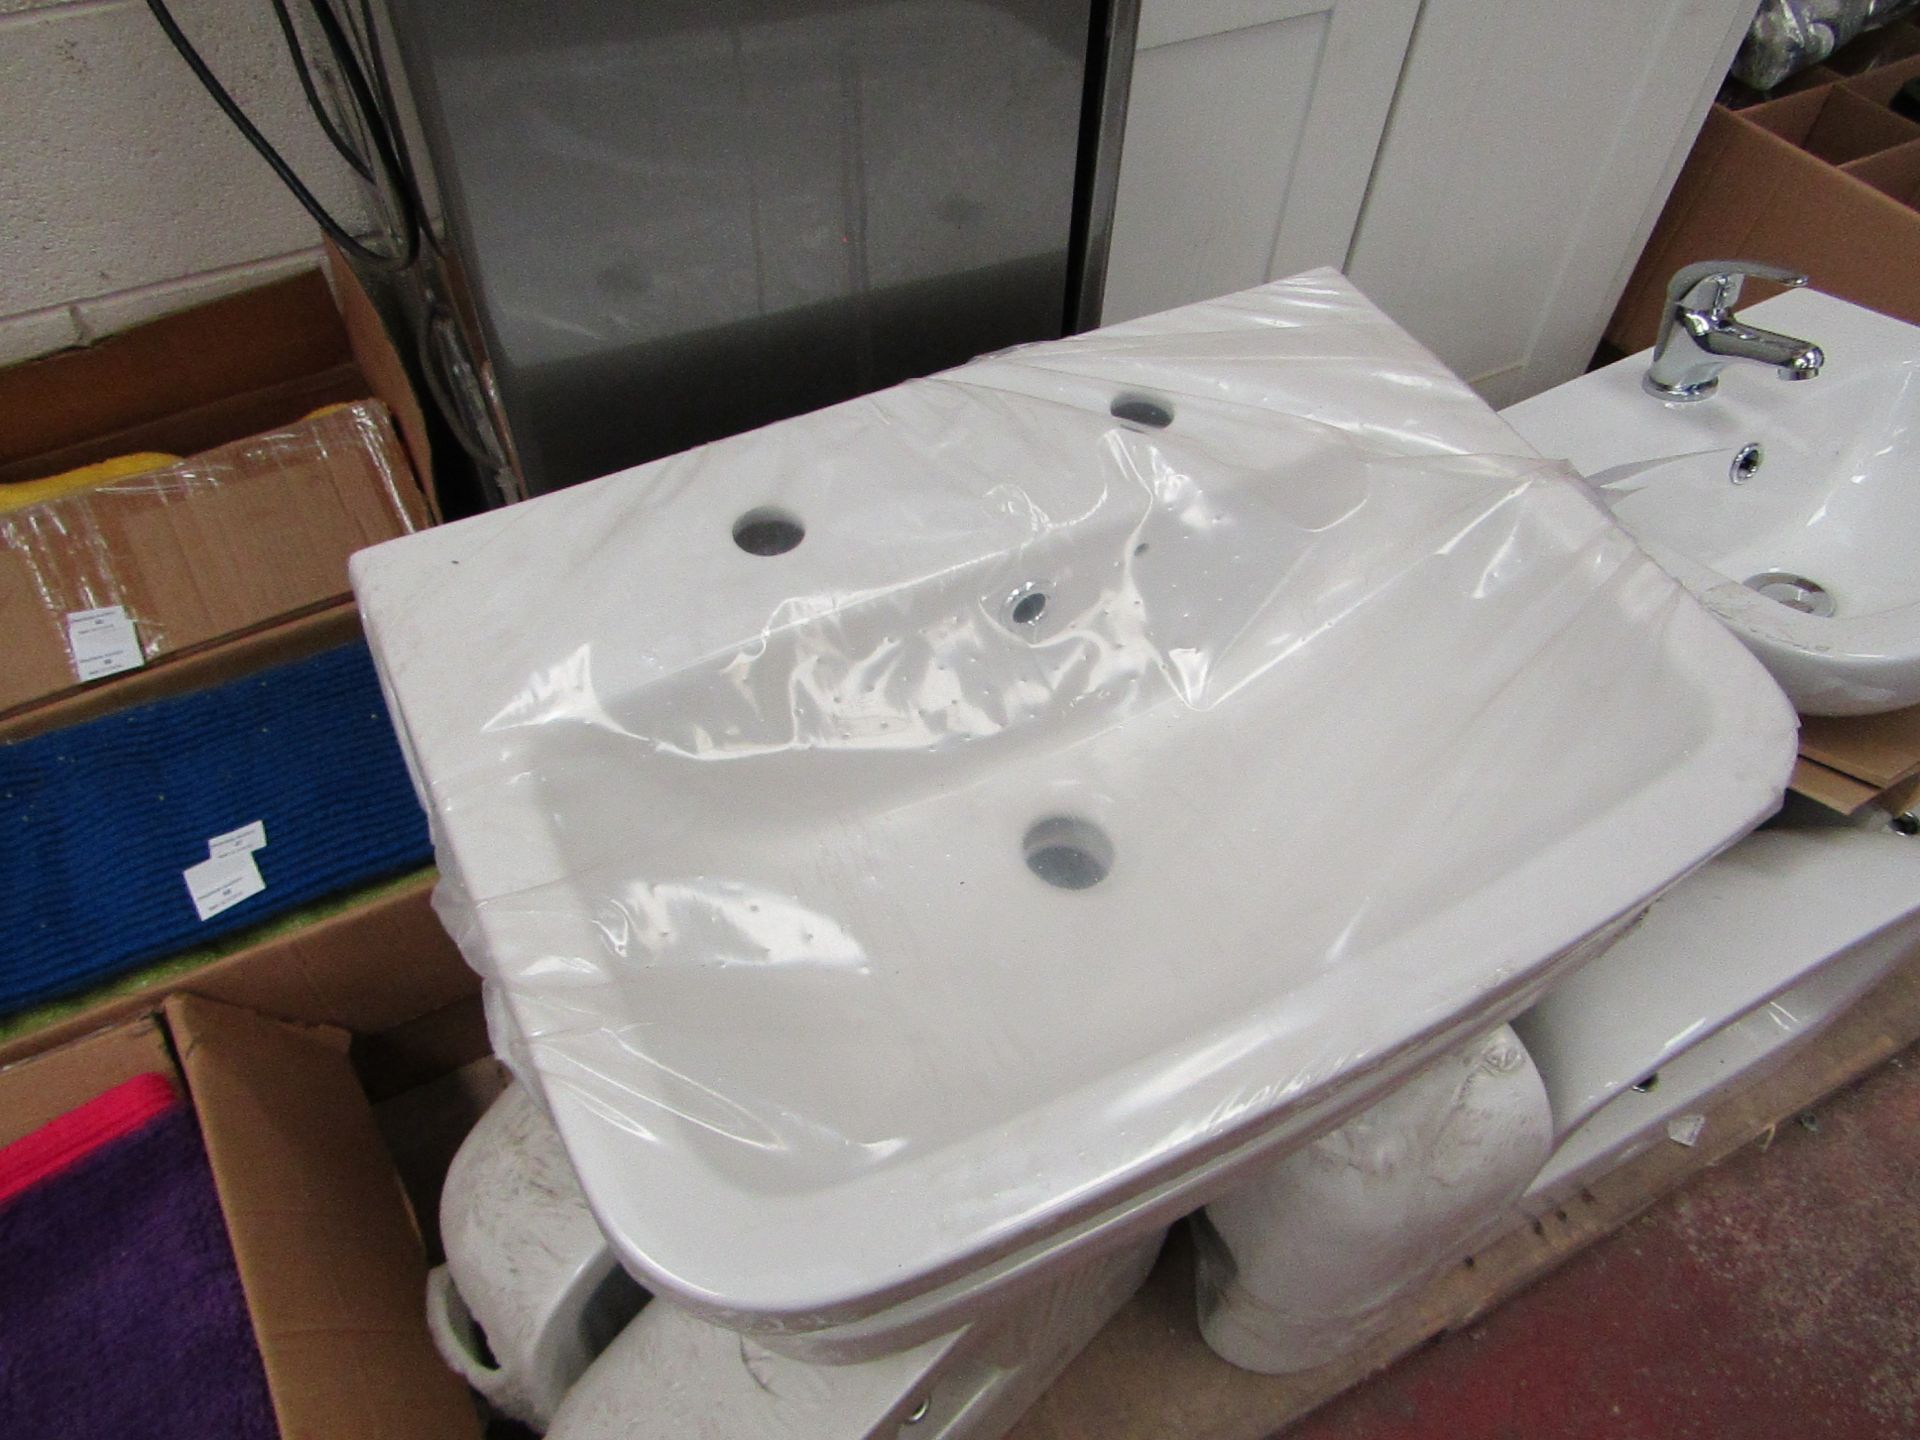 Lecico 400mm 2 tap hole sink, new.